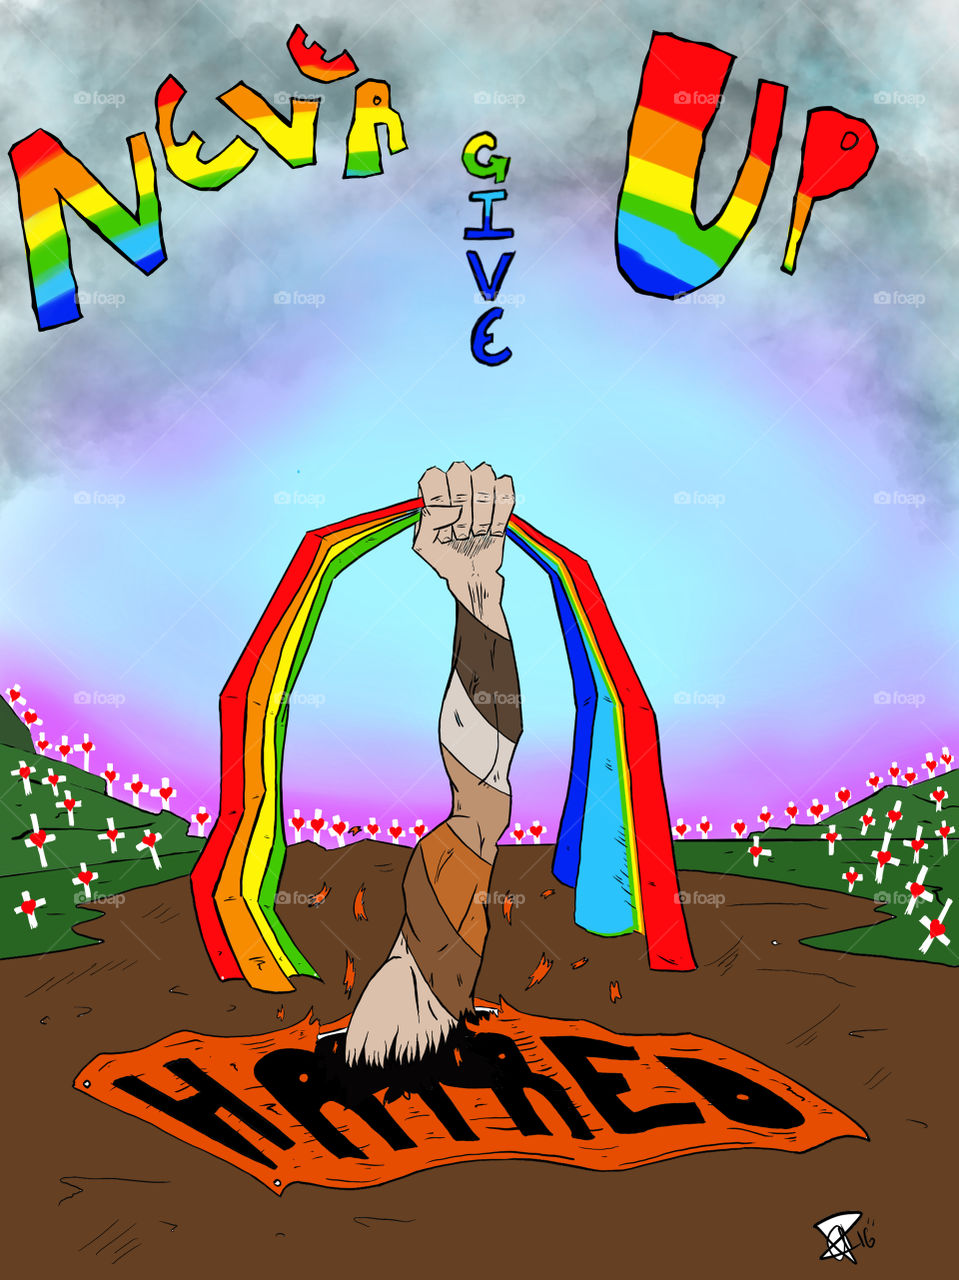 Never give up LGBT community! You have come a long way! We love you!